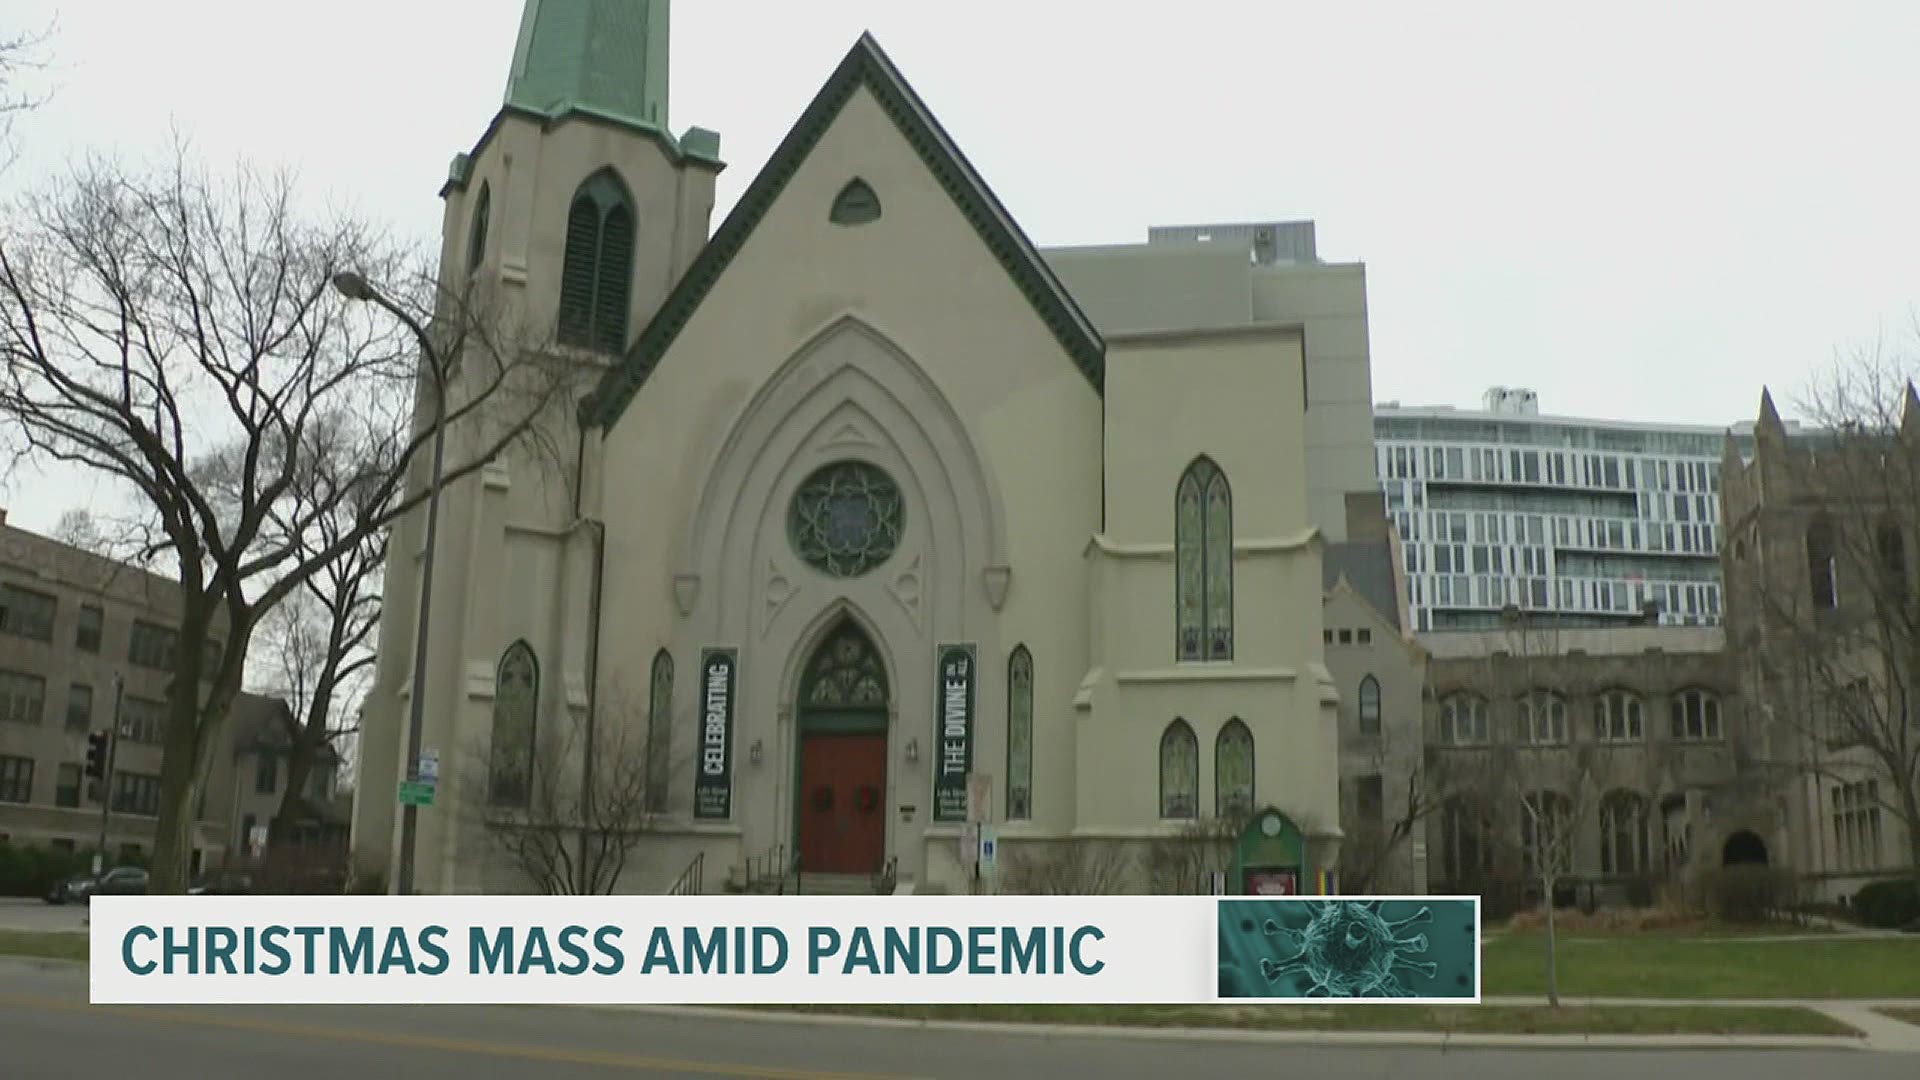 On Christmas Eve 2020, many church masses looked very different from other years’, due to the pandemic.